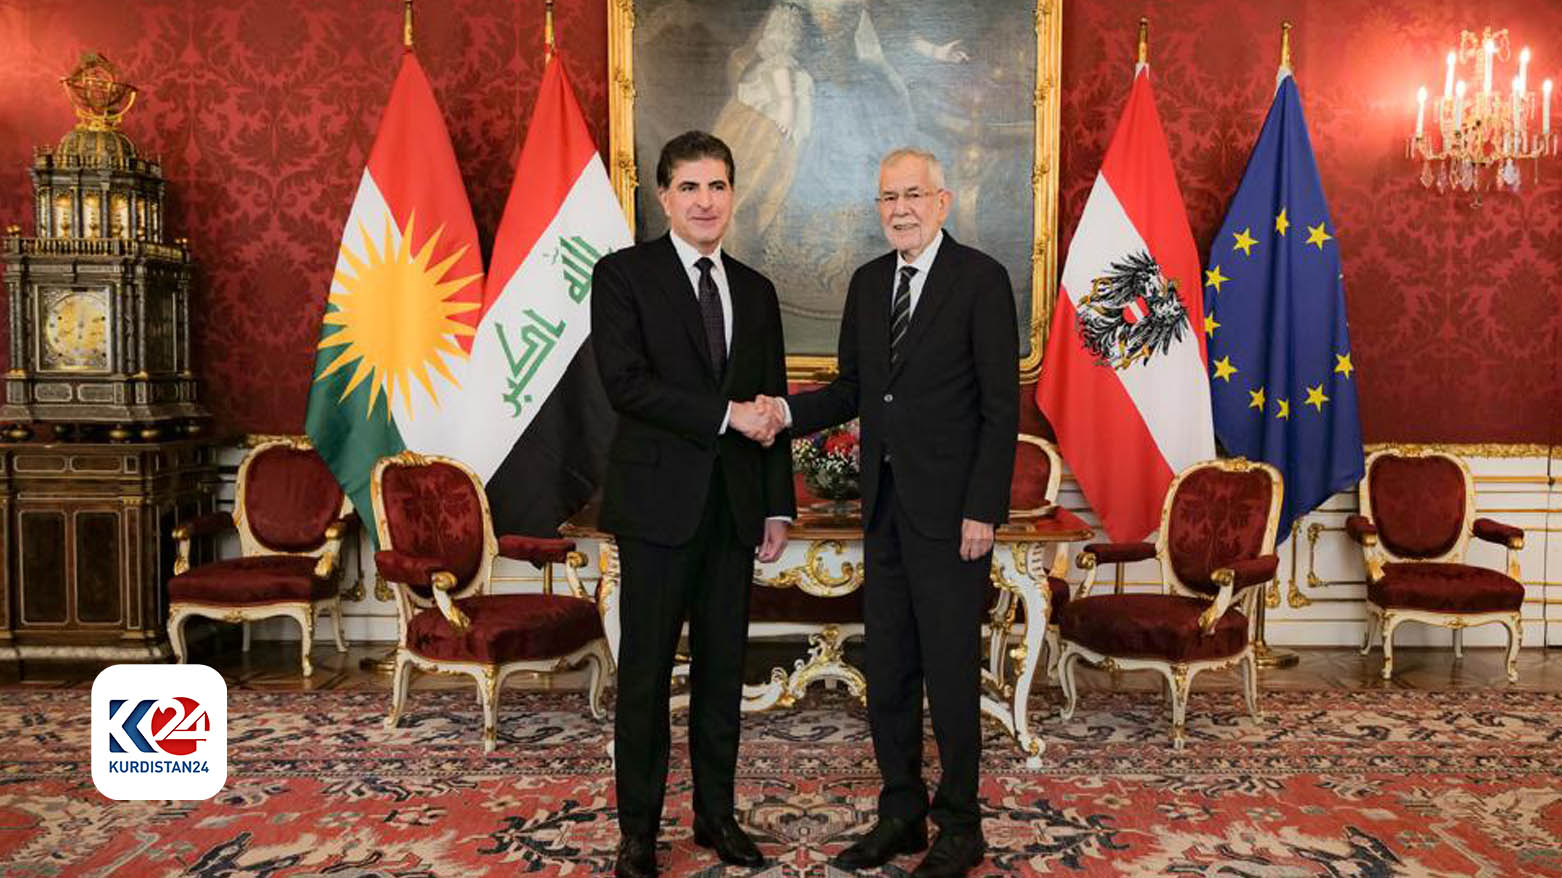 PM Barzani met all demands presented to him during his visit to Halabja Says governor